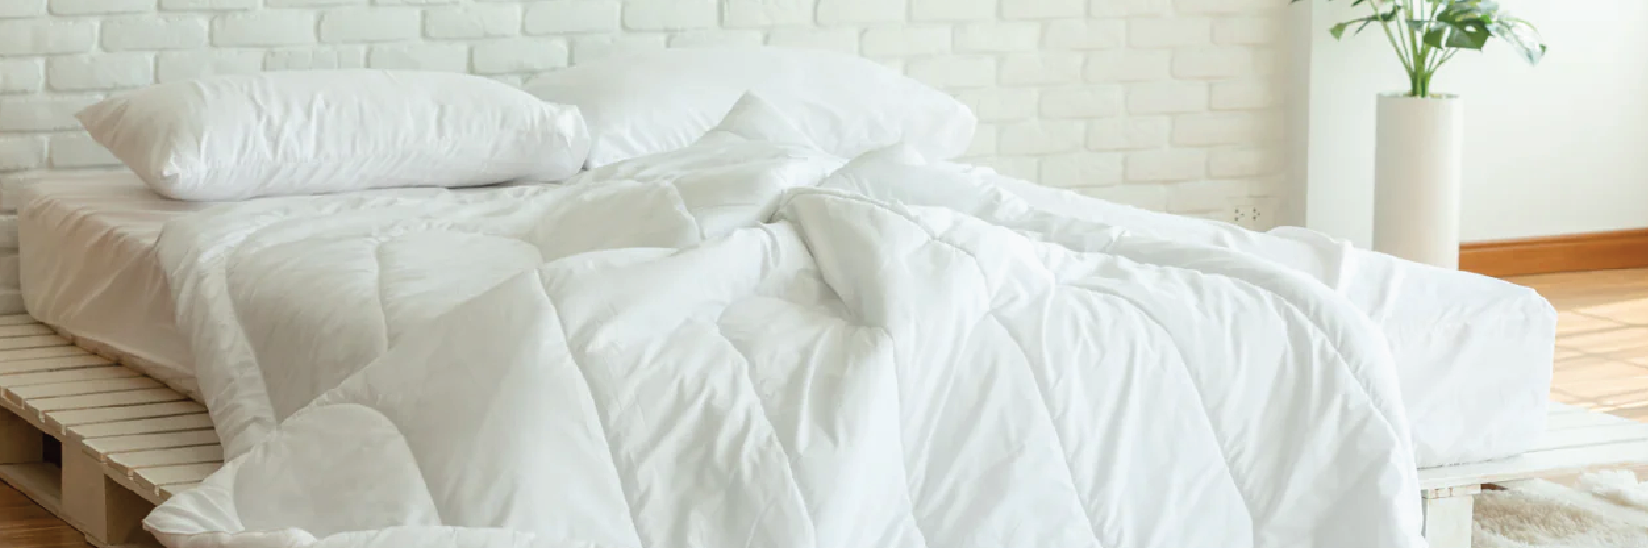 Get Your Best Sleep with Affordable, Quality Beds and Mattresses